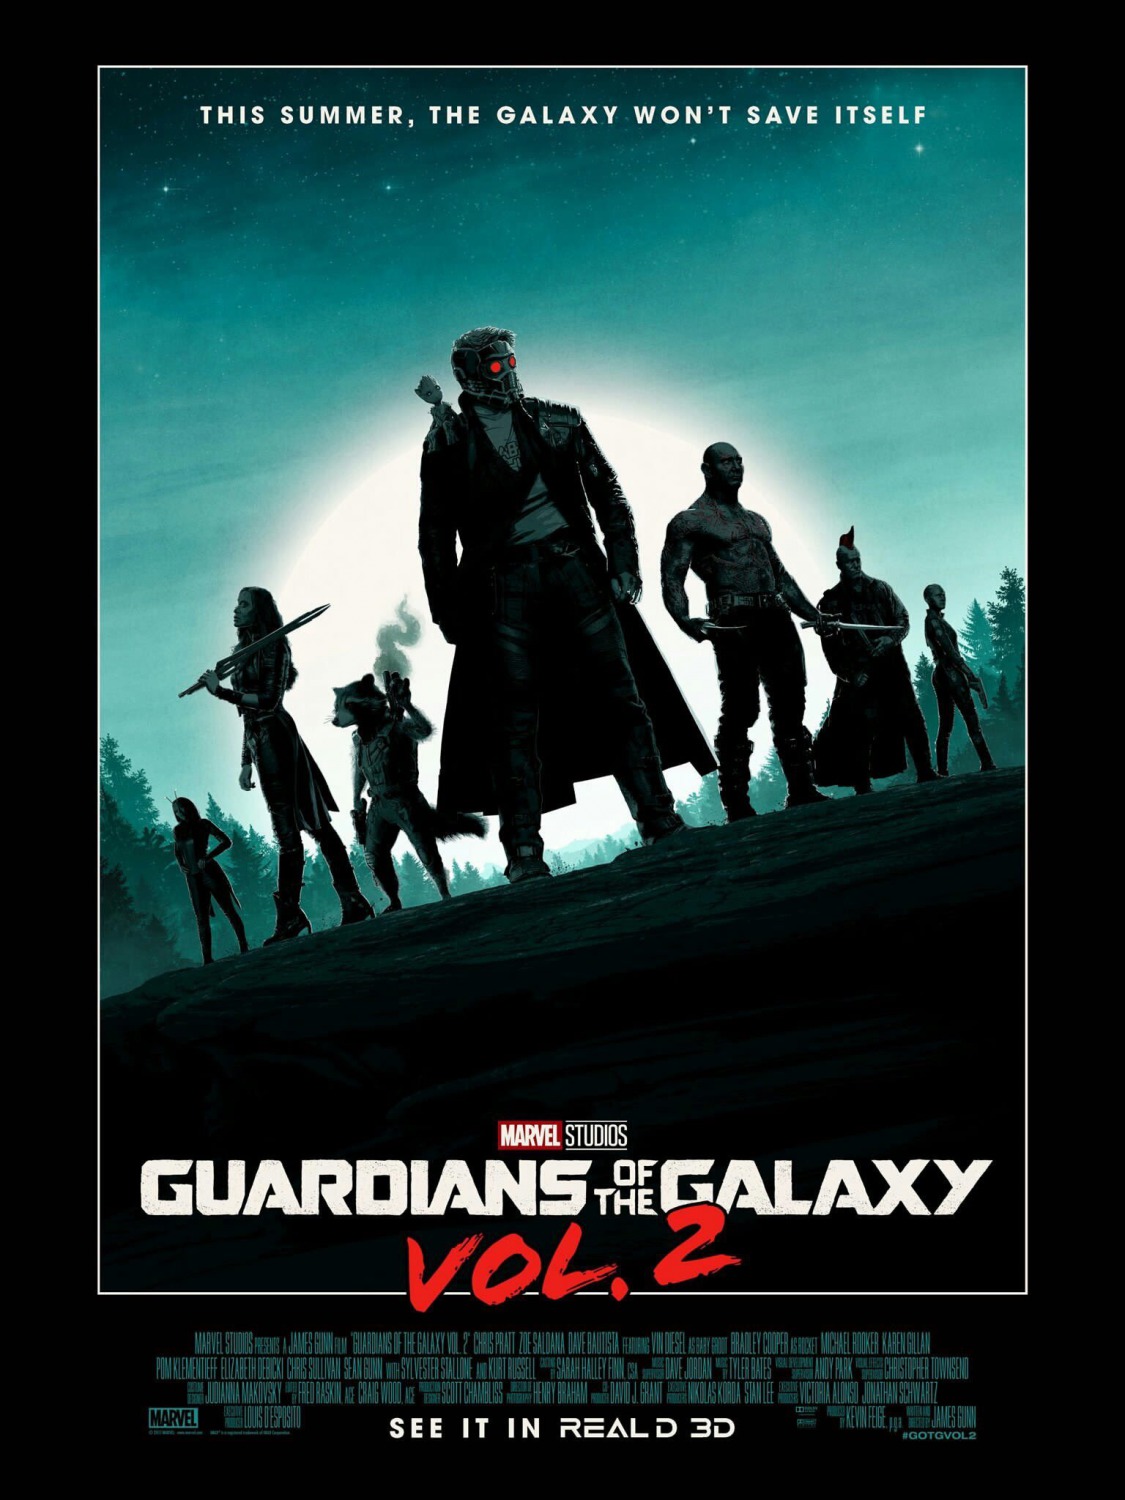 Galaxies Are Mostly Helpless According to New Guardians of the Galaxy Vol. 2 Poster